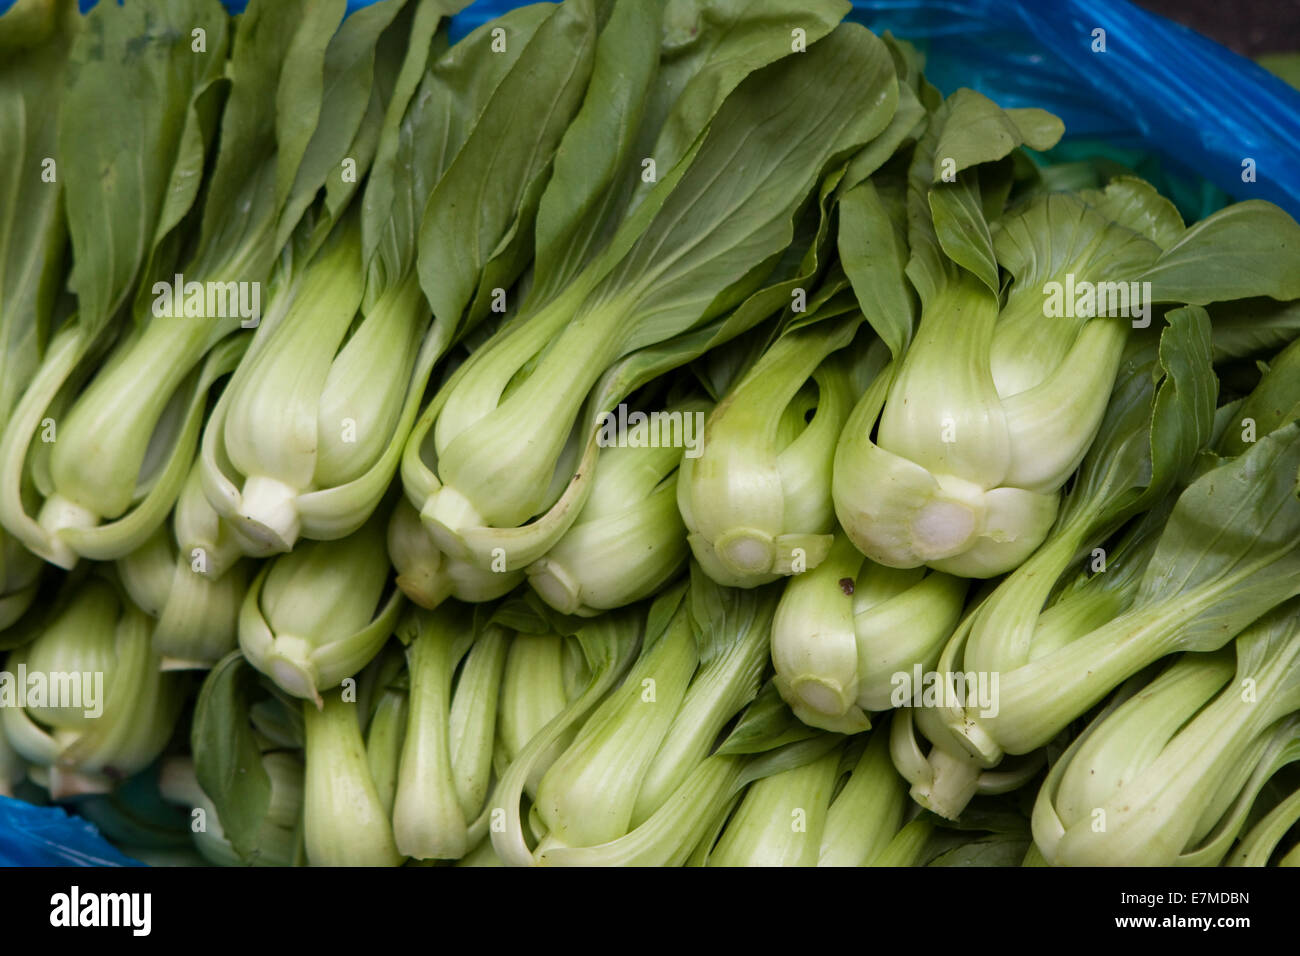 Chinese Bok Choy green vegetable Stock Photo